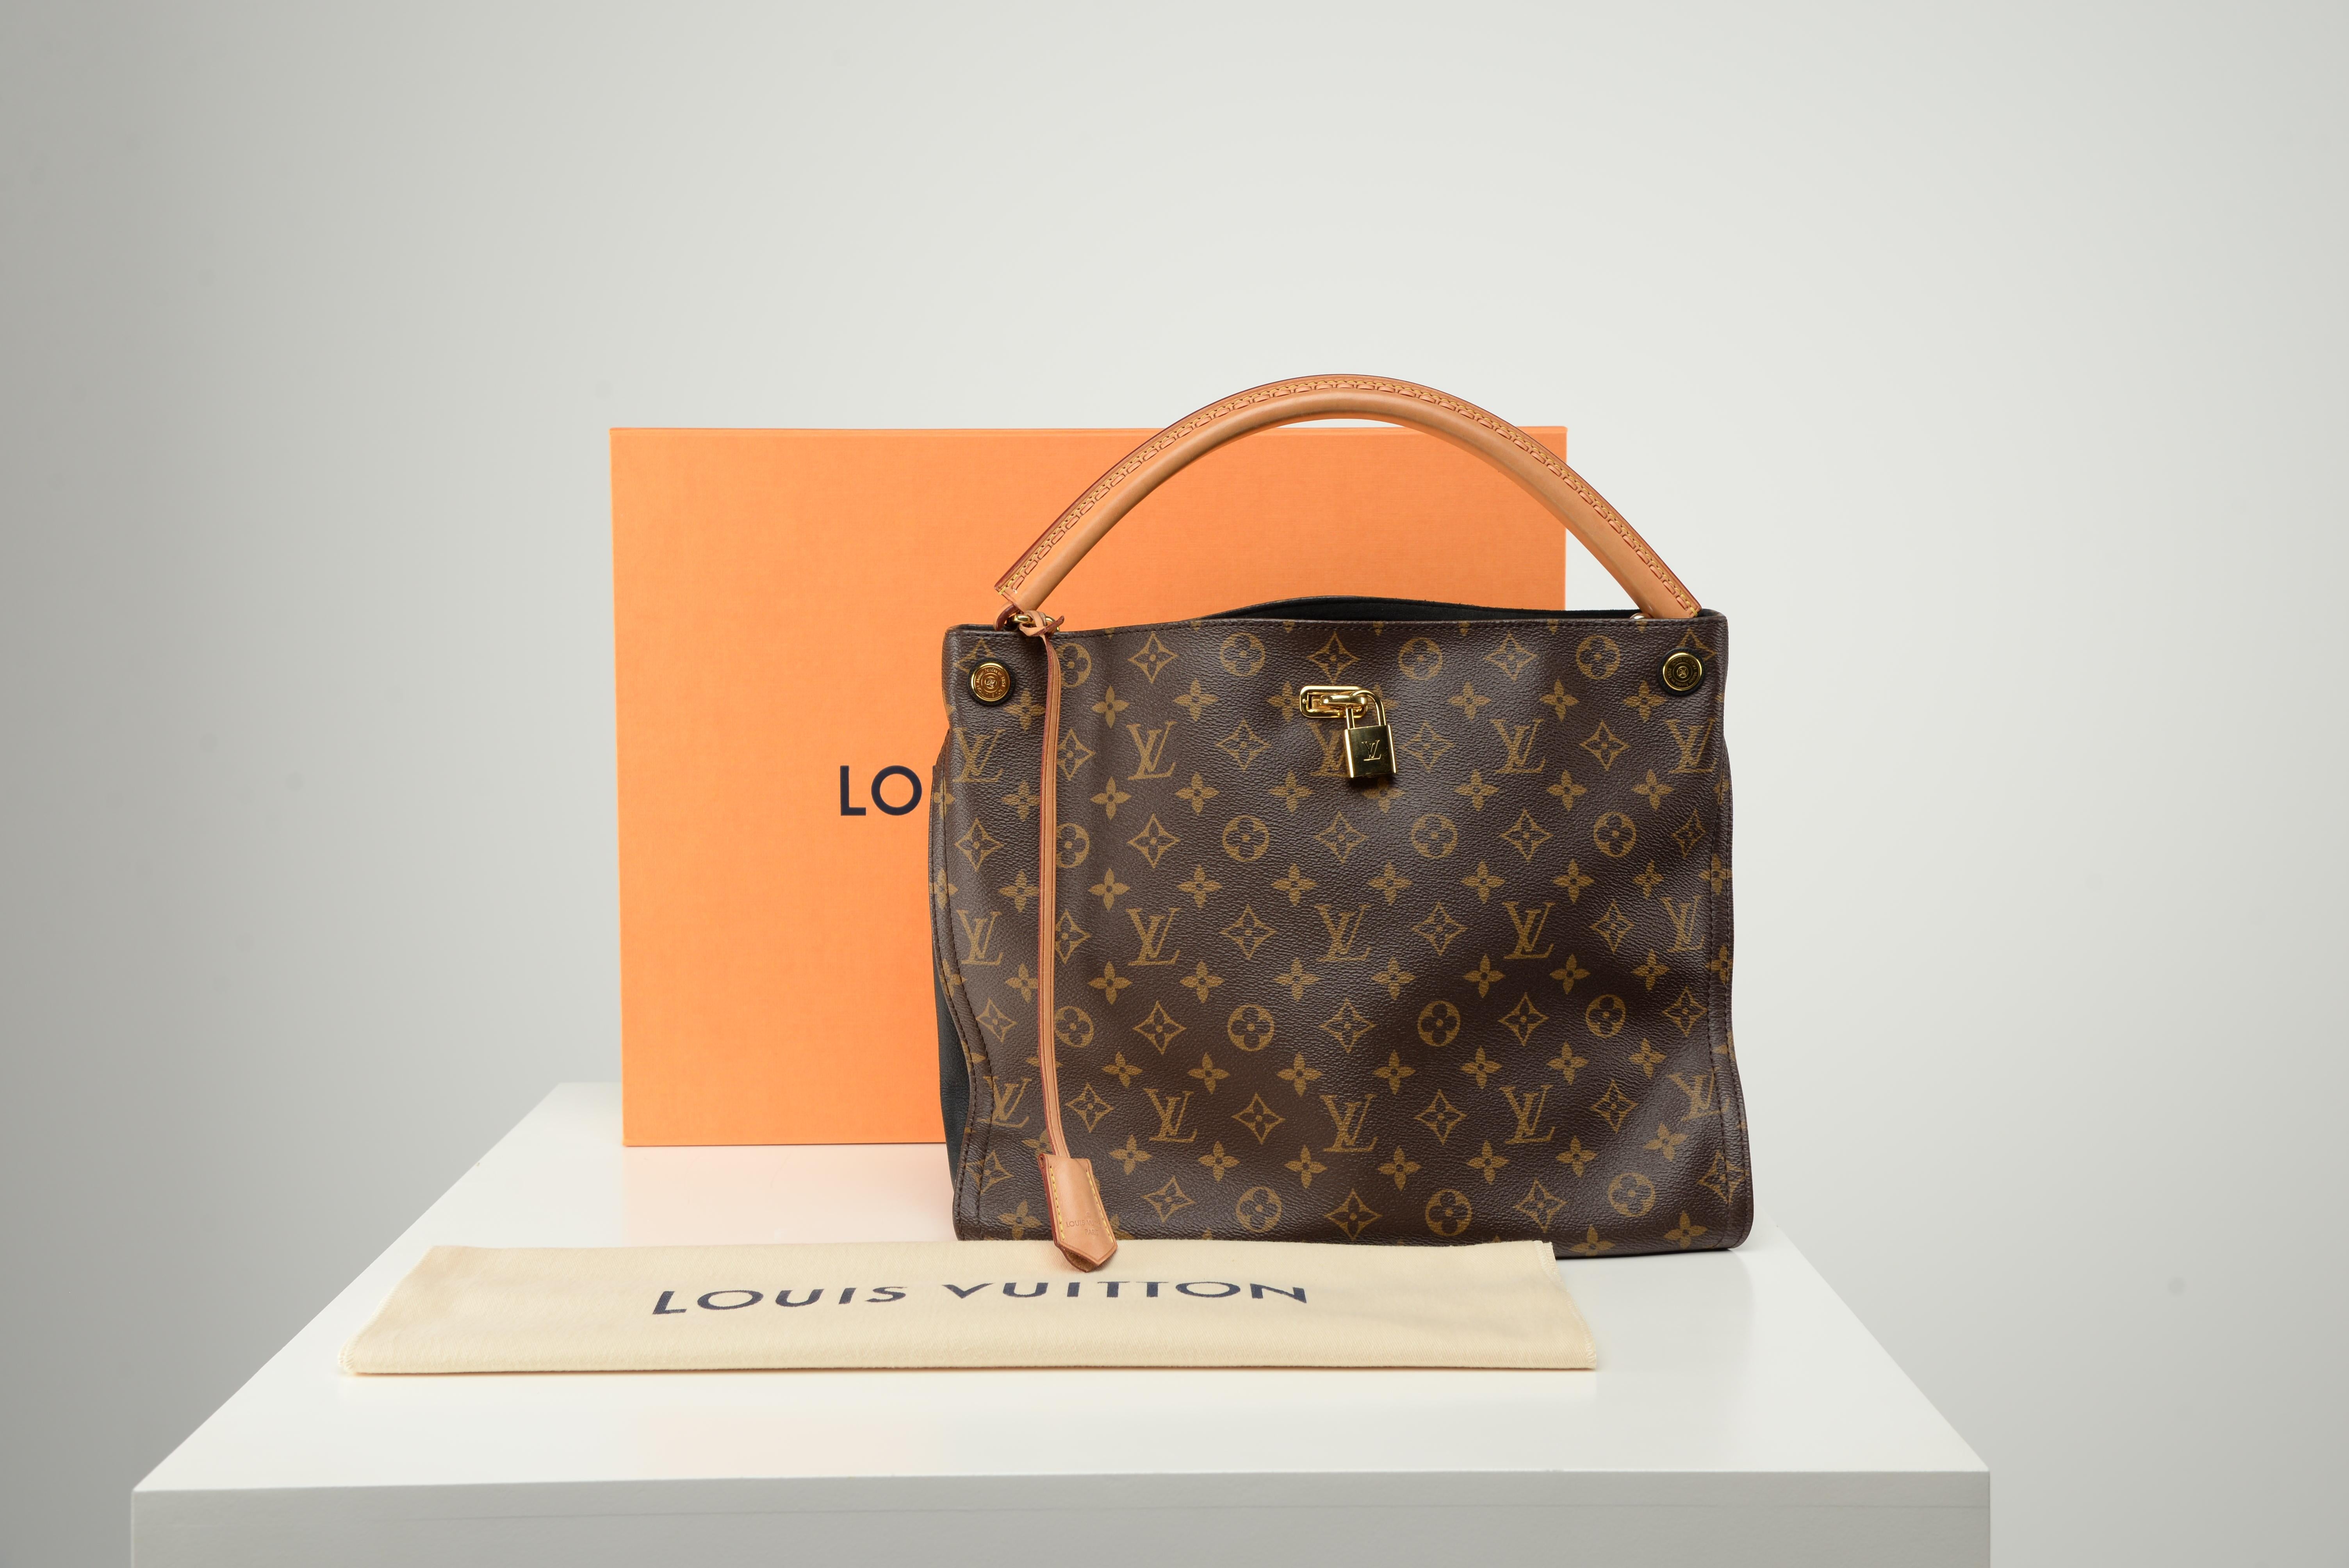 From the collection of SAVINETI we offer this Louis Vuitton Gaia MNG Bag:
-	Brand: Louis Vuitton
-	Model: Gaia MNG
-	Year: 2015
-	Code: DR4125
-	Condition: Good (very small signs of use on the hardware - see pictures), overall in very nice